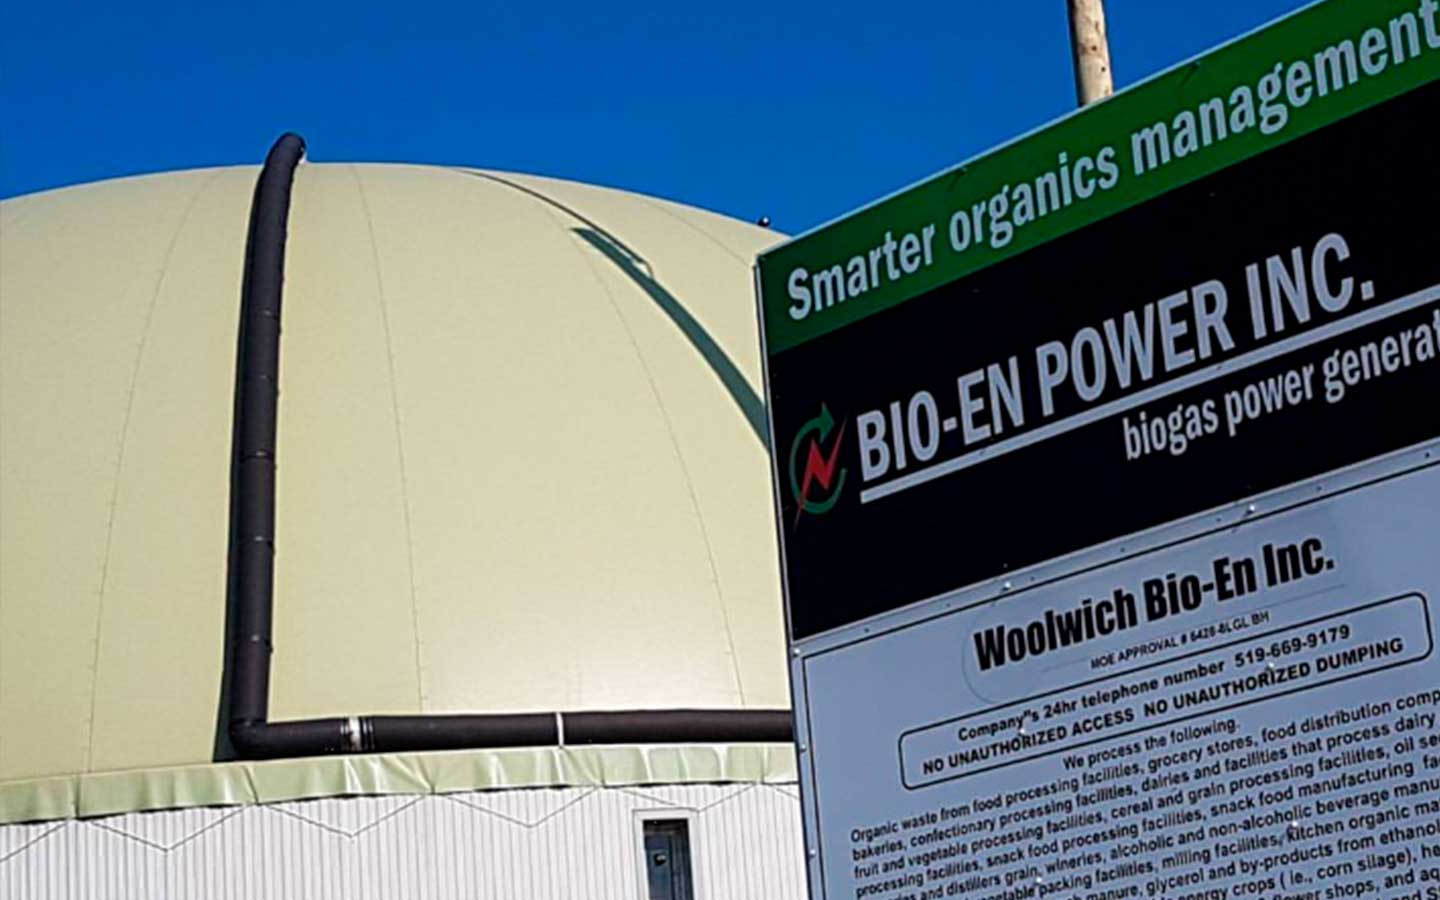 Biogas plant operator proposes some changes to the Elmira facility